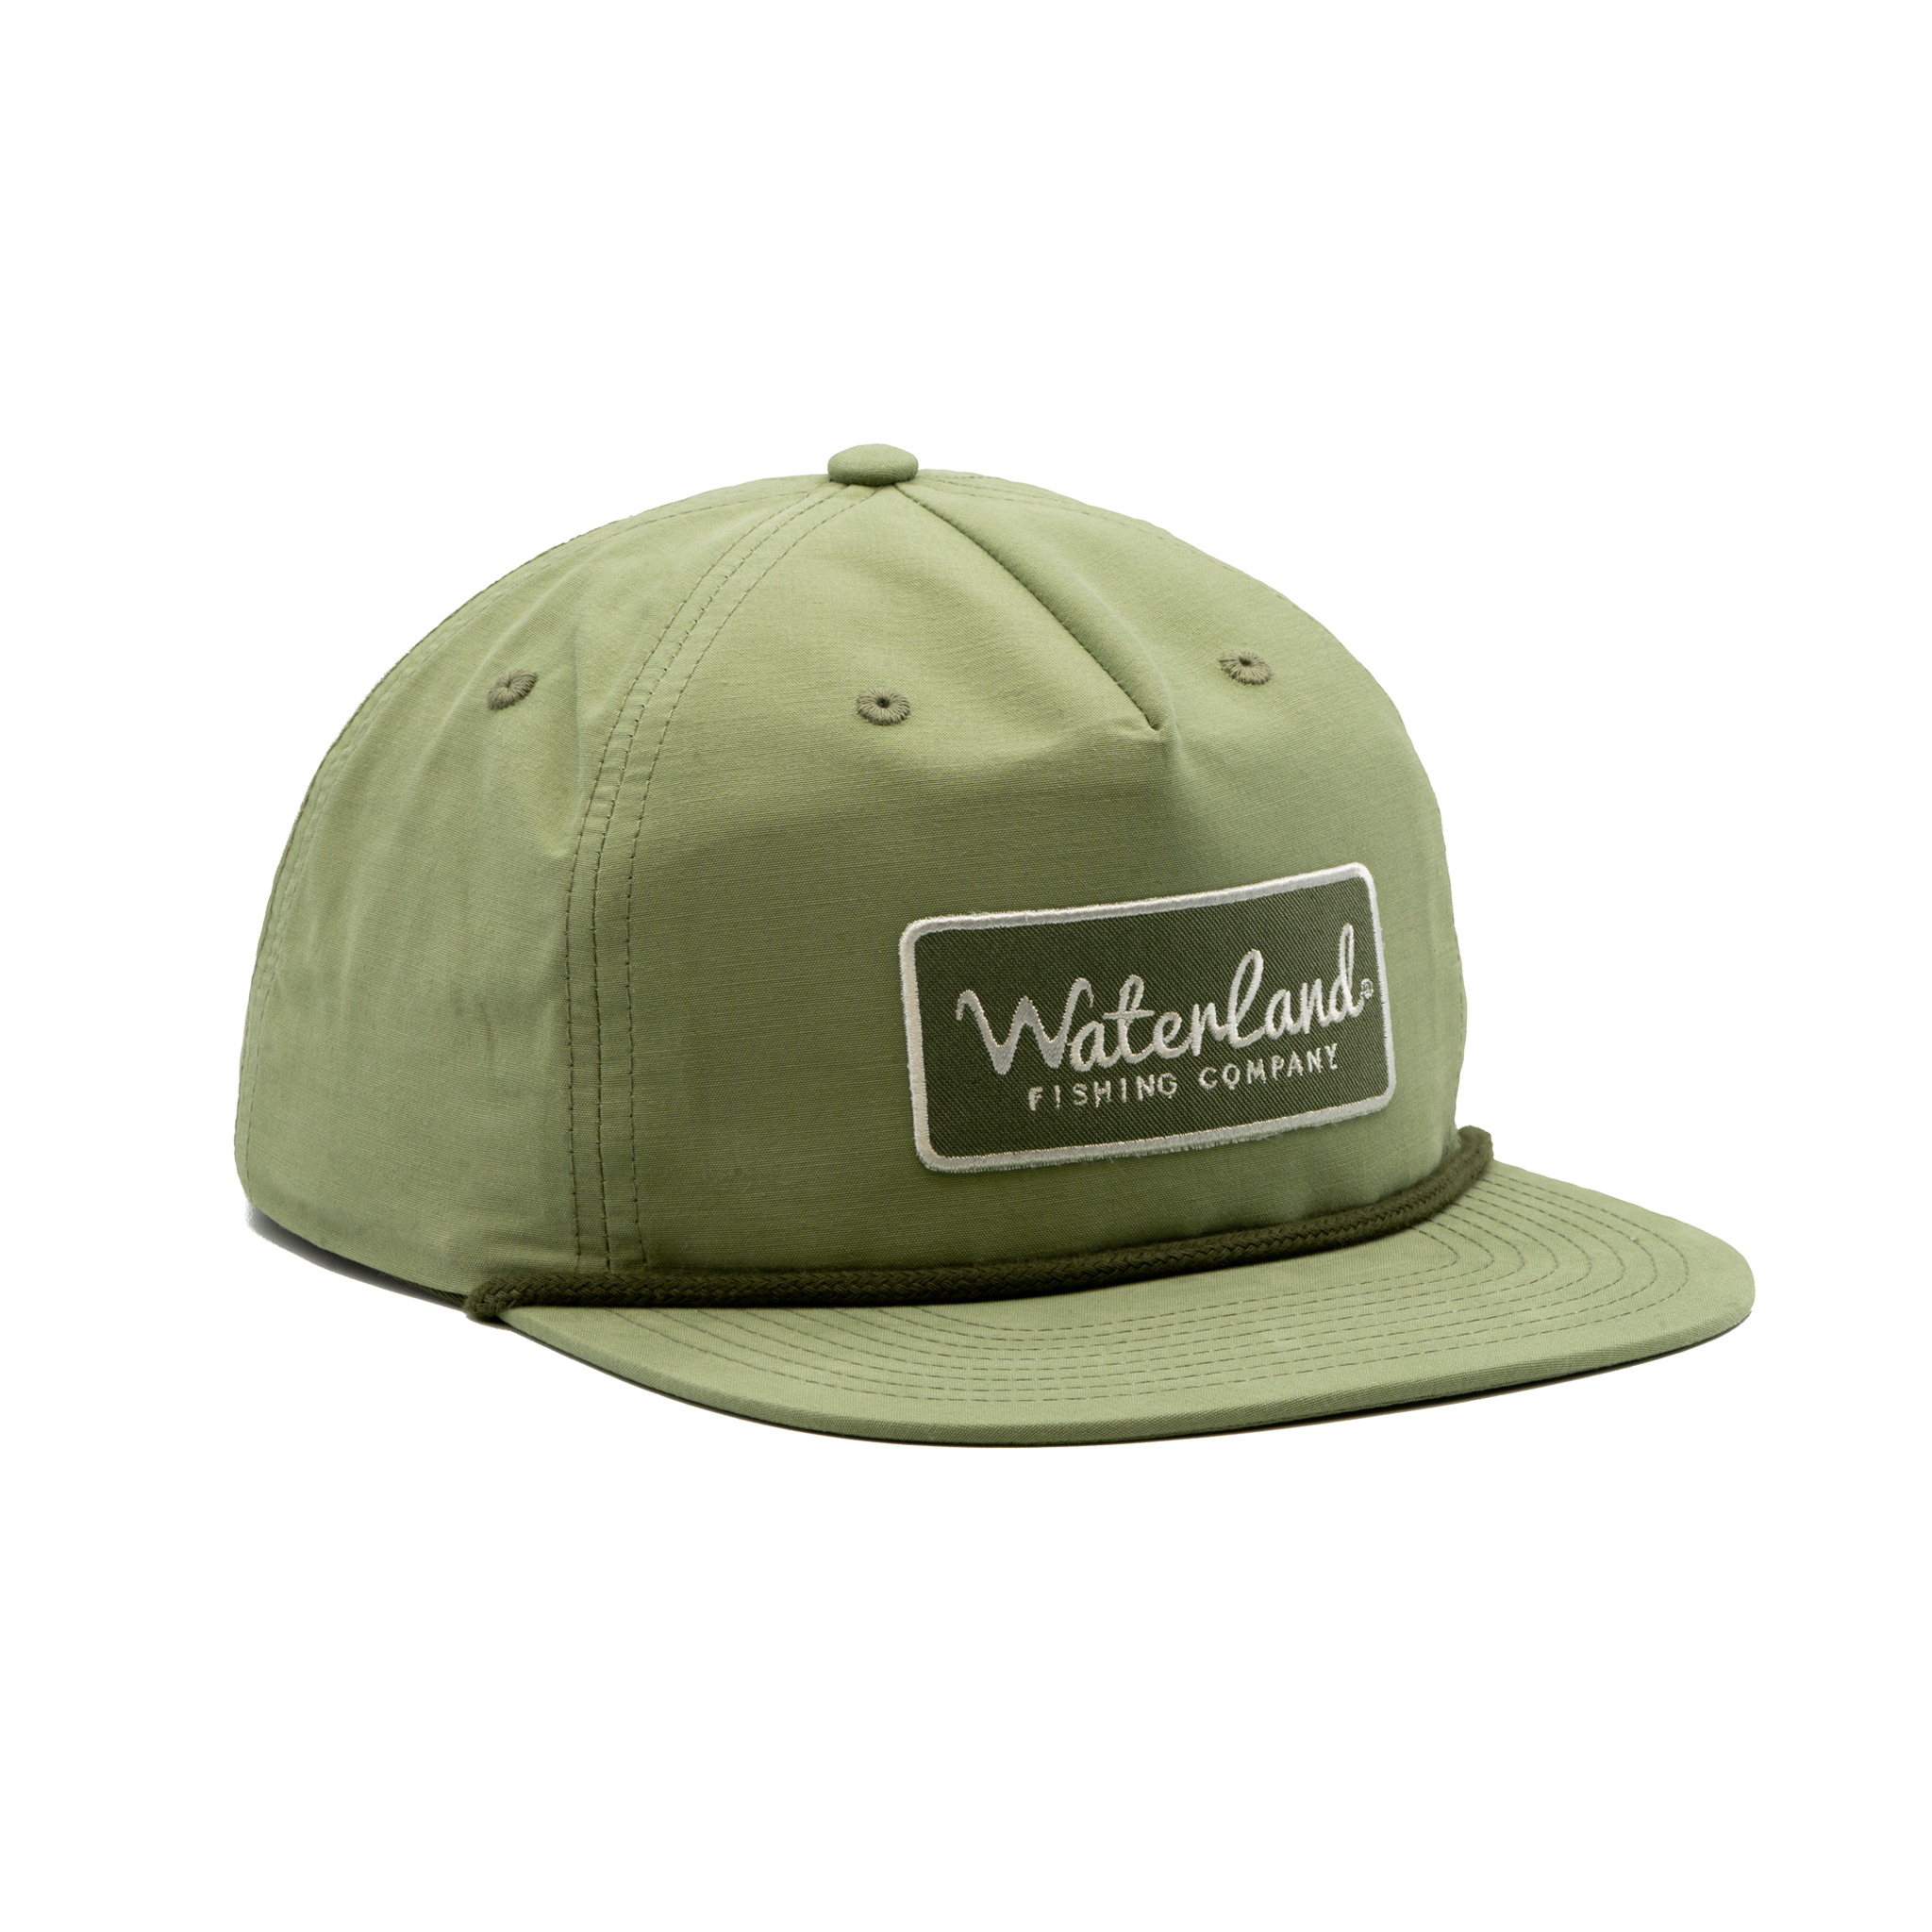 Waterland Co. - Premium Snapback Hats - The Old Timer Series